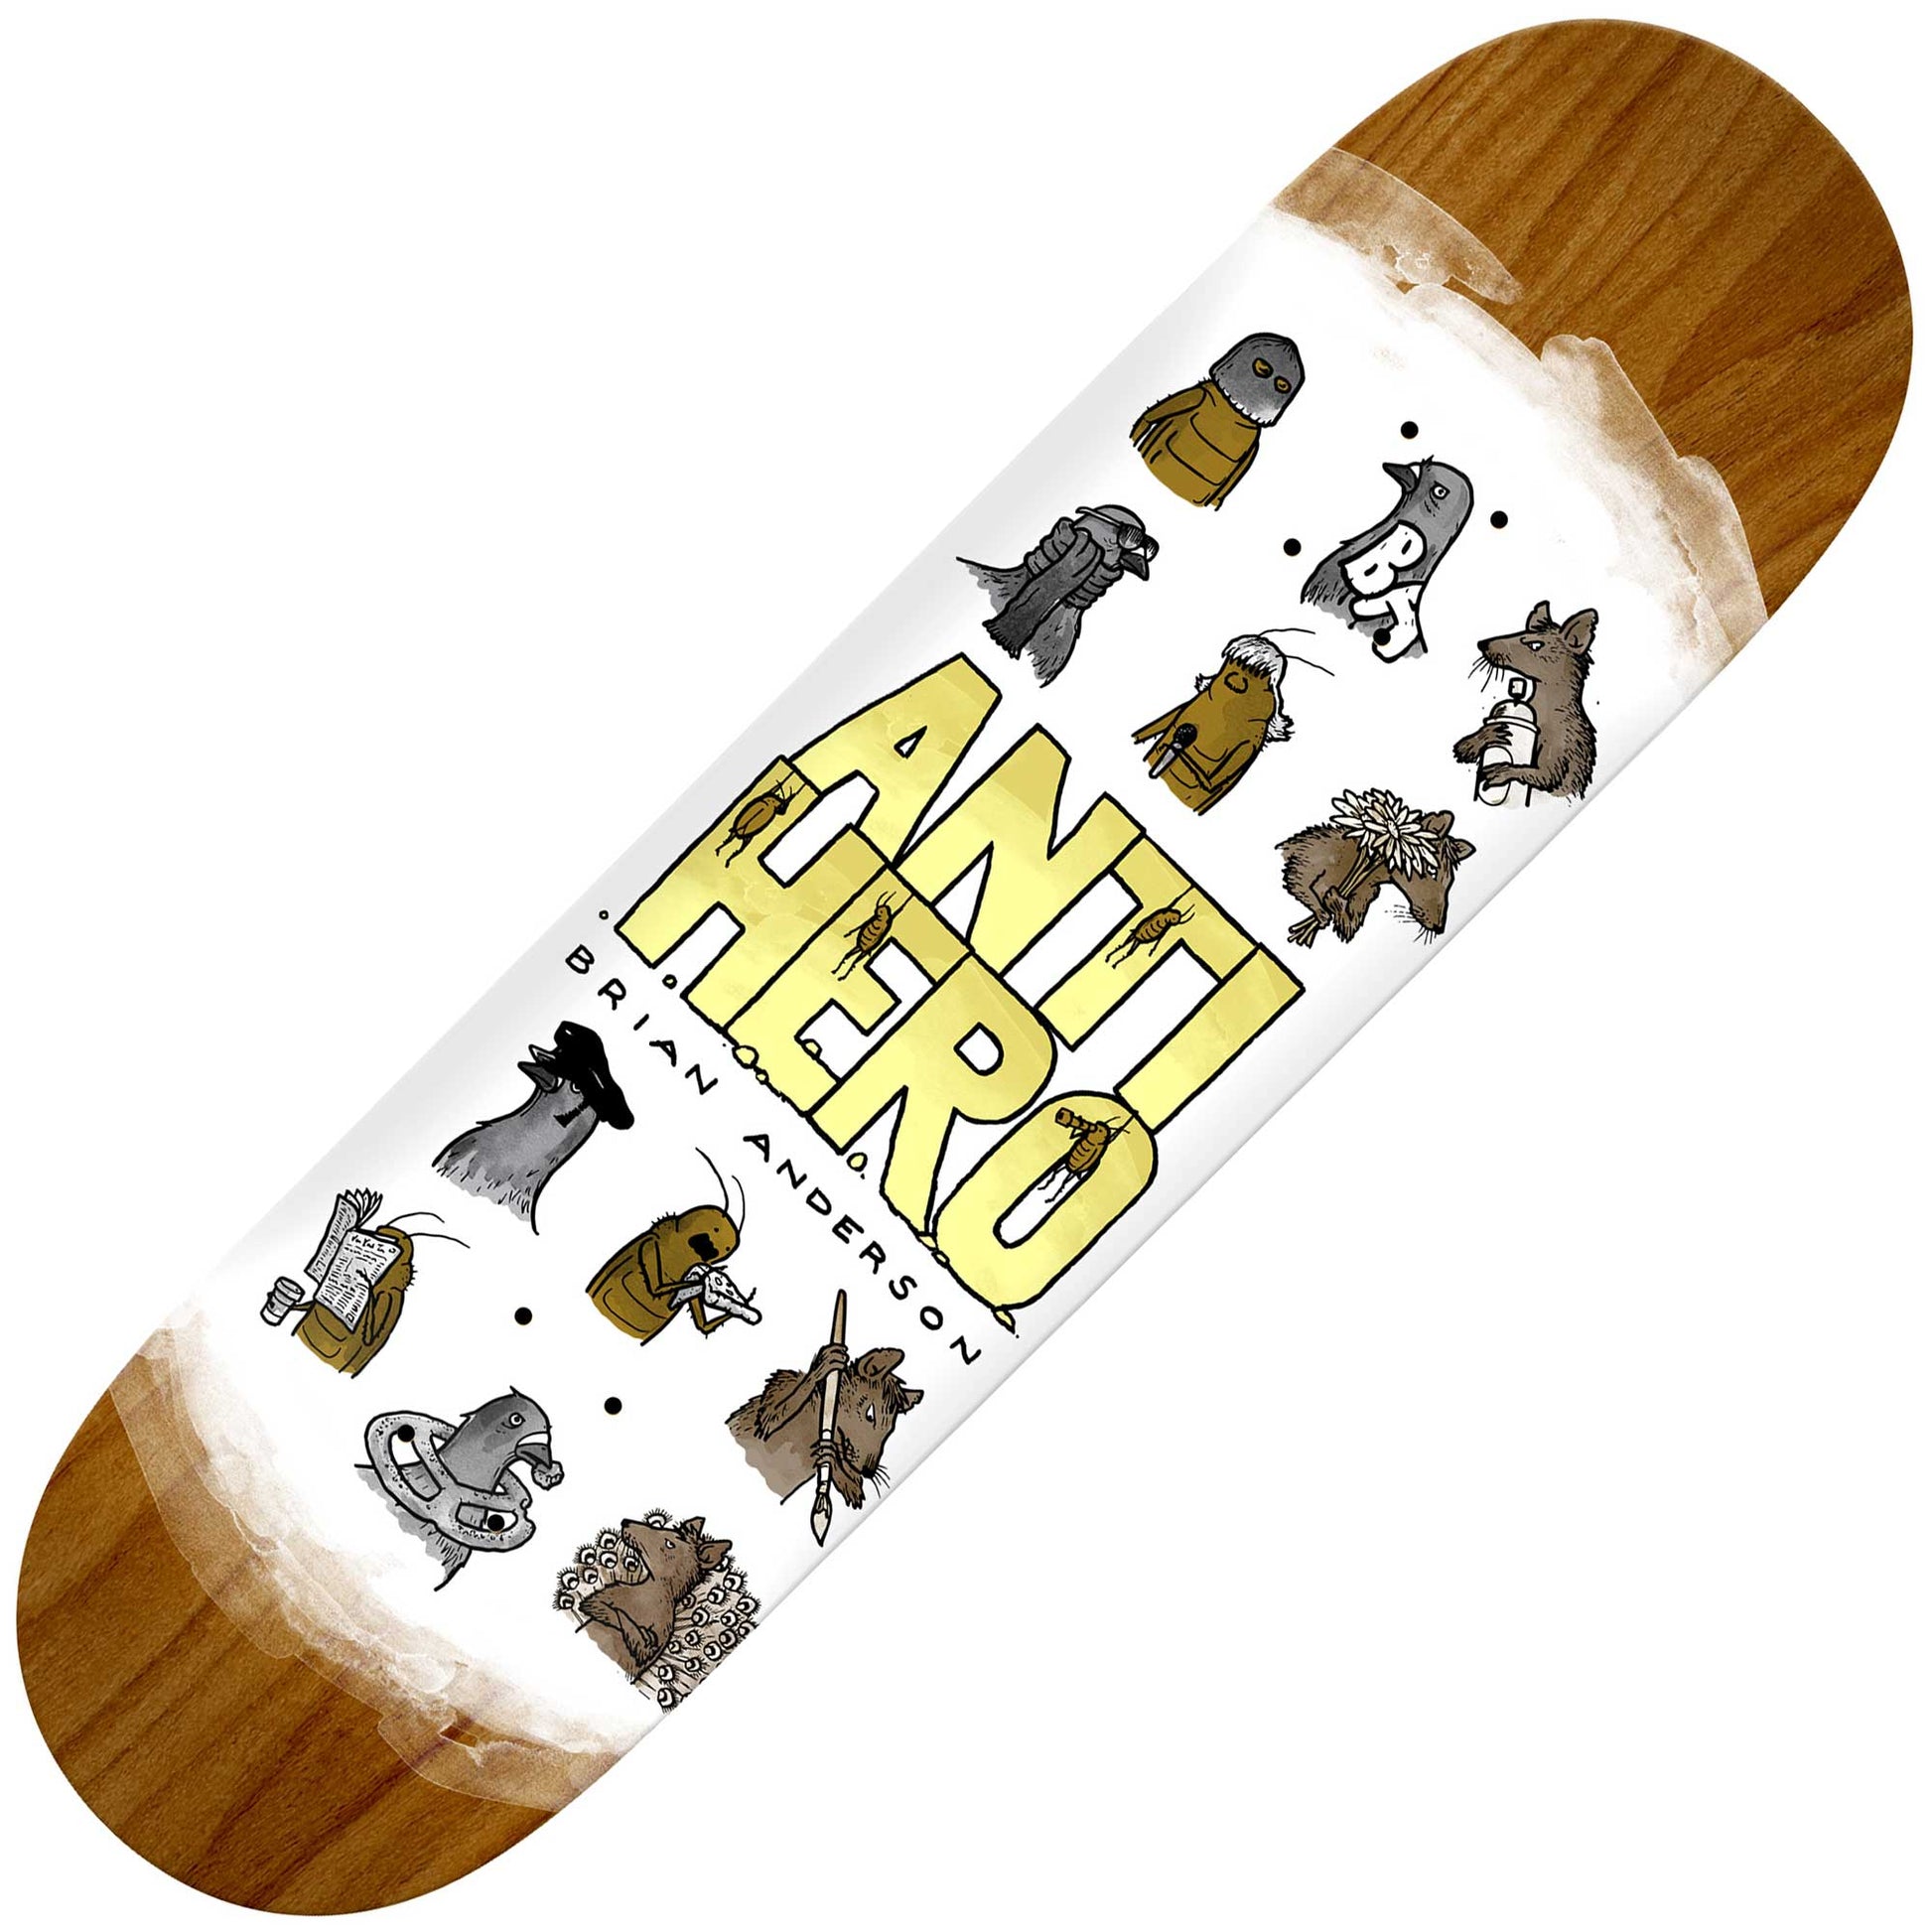 Anti Hero B.A. Usual Suspects Deck (8.75") - Tiki Room Skateboards - 1